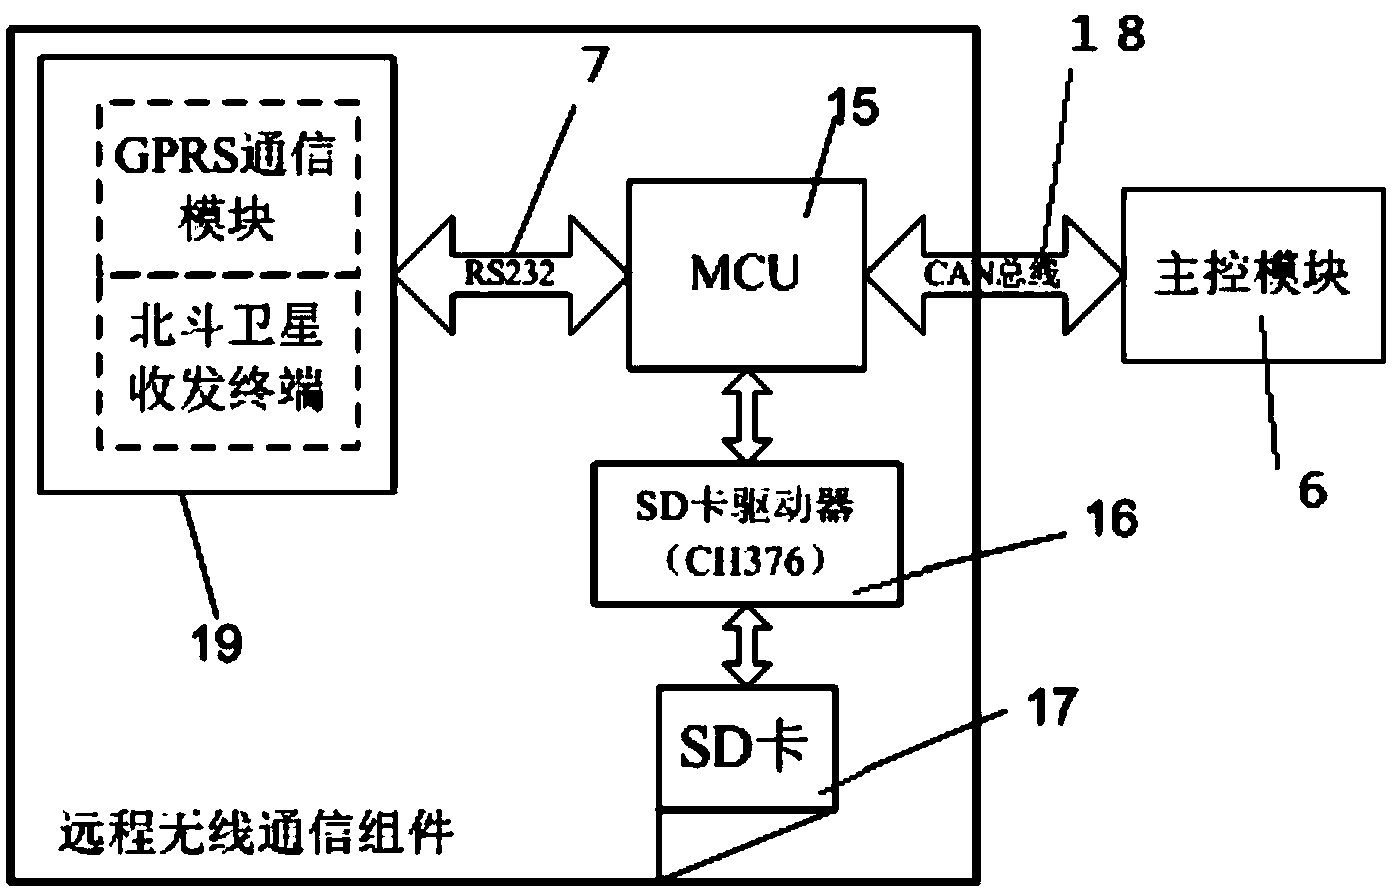 Spectral irradiance meter with GPRS network communication and Beidou satellite communication technology being combined